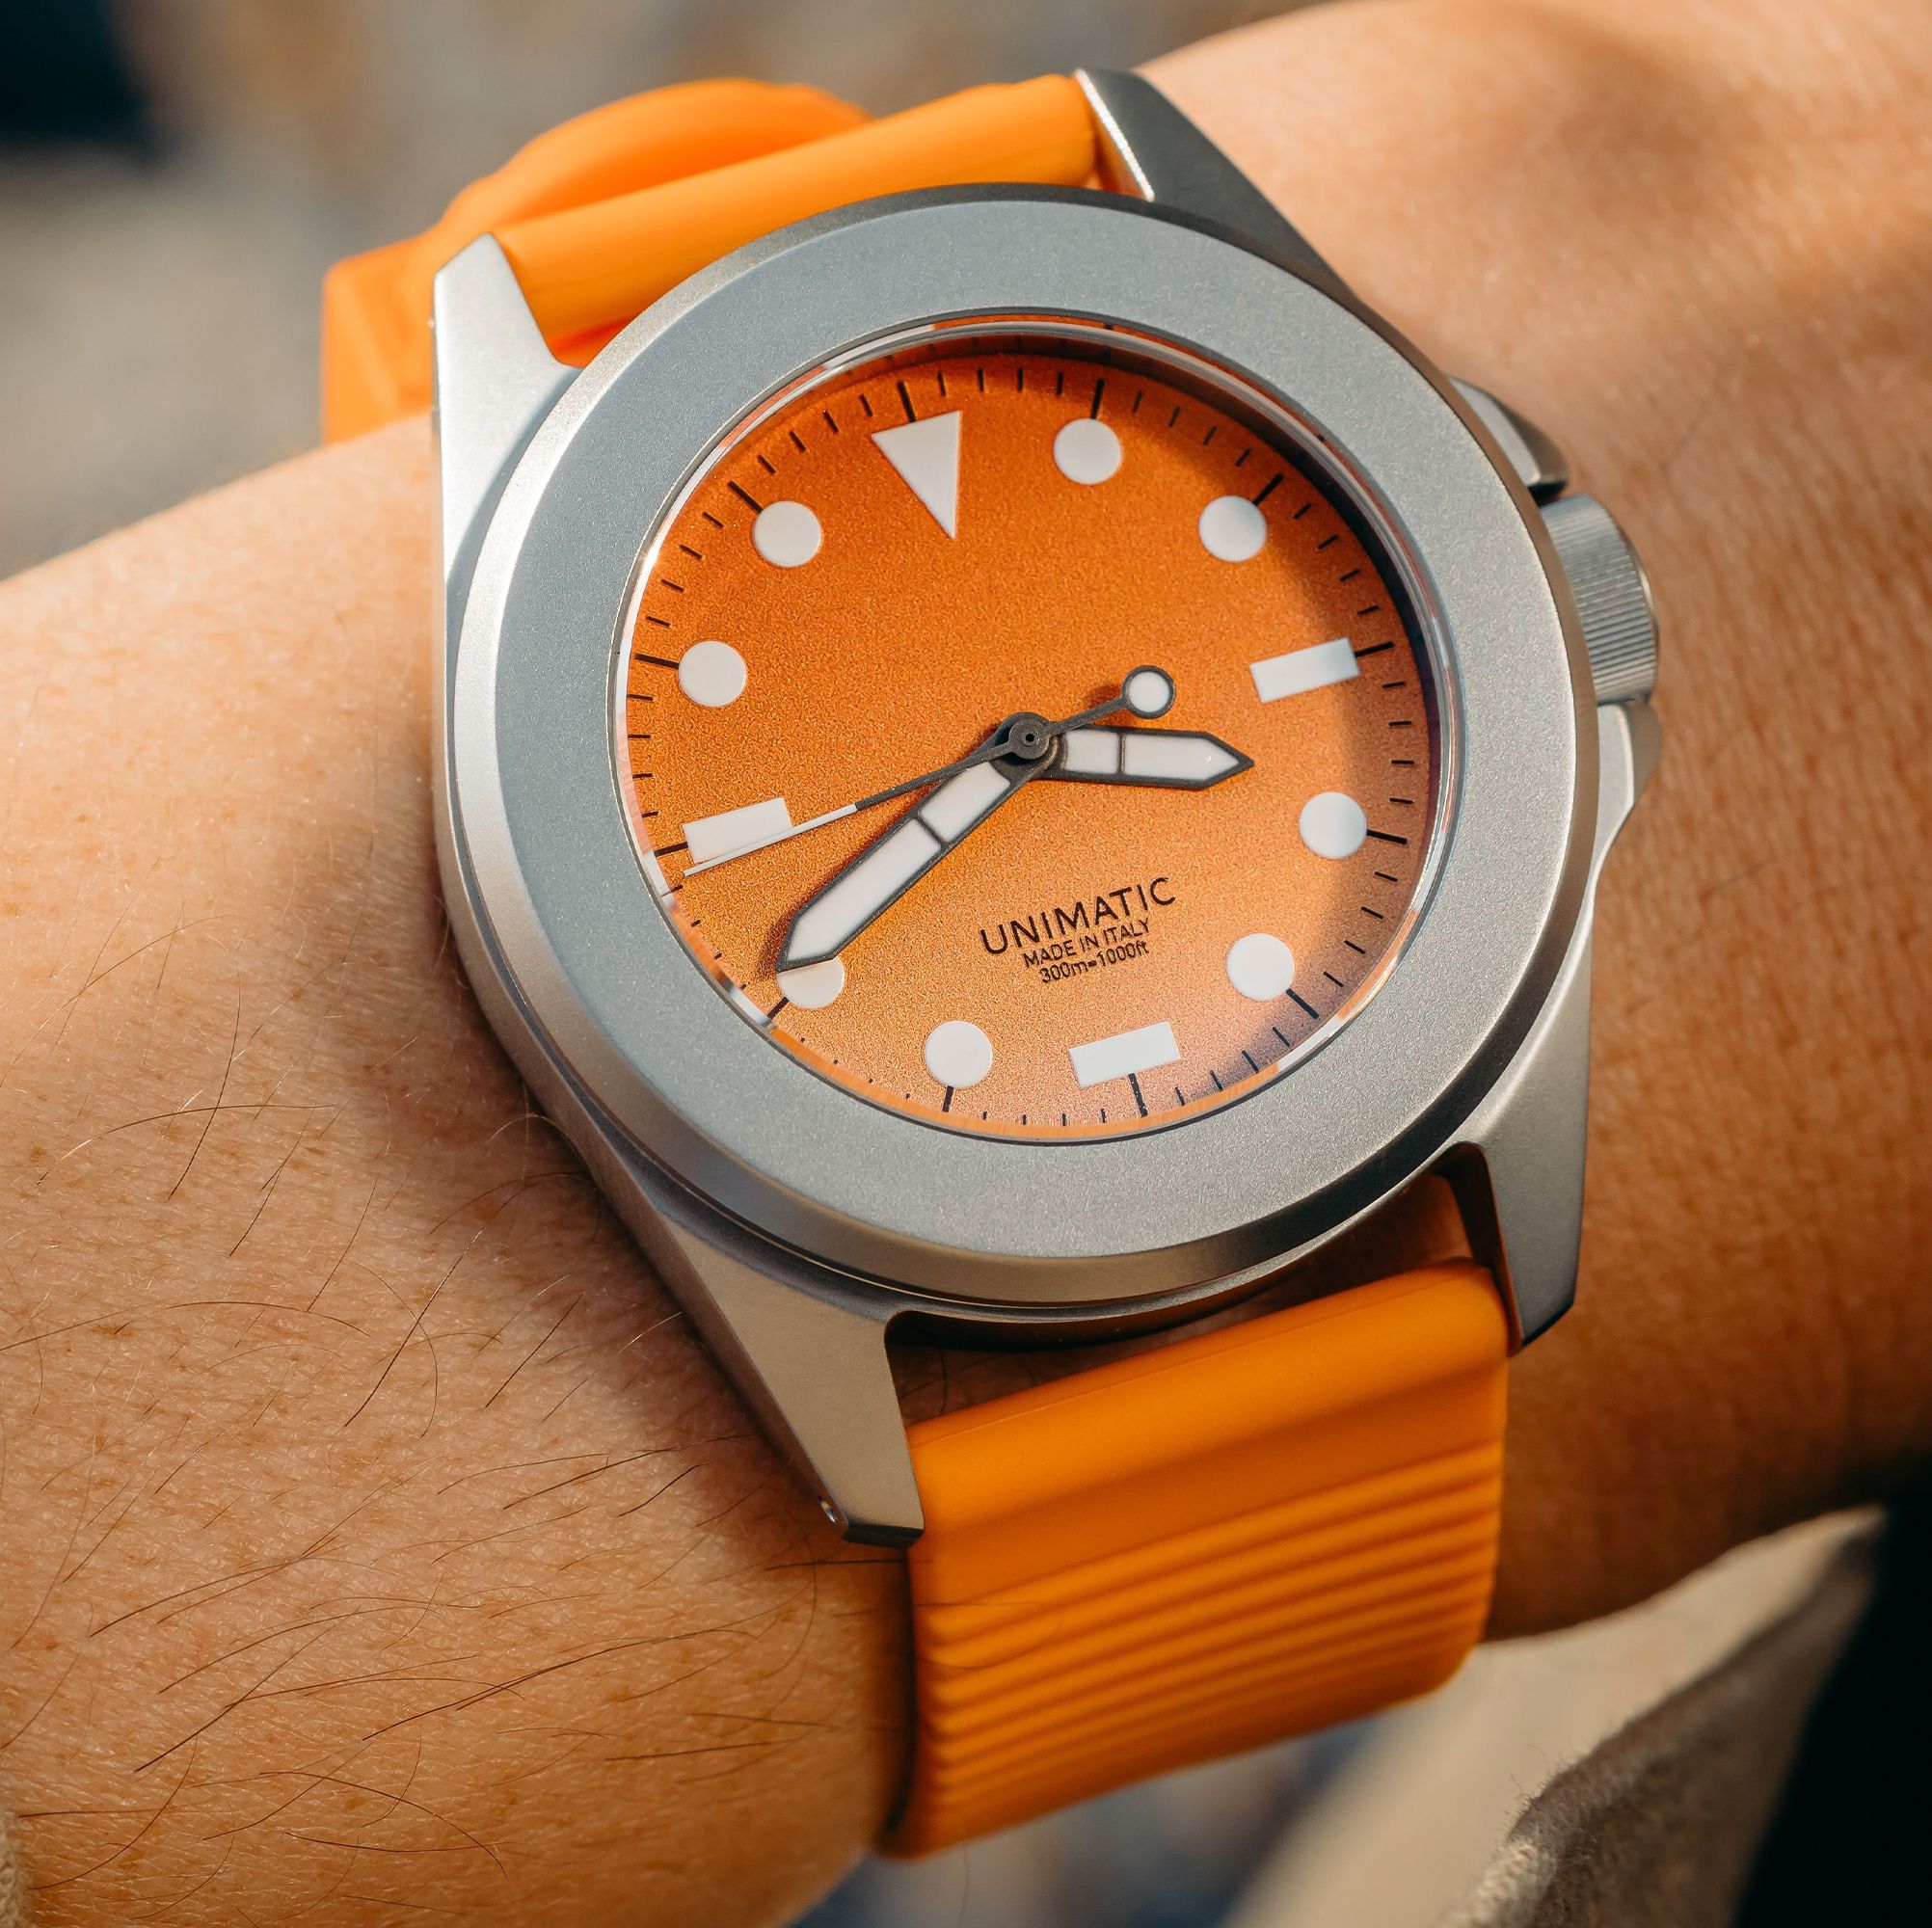 Only 225 of These Huckberry x Unimatic Watches Were Made